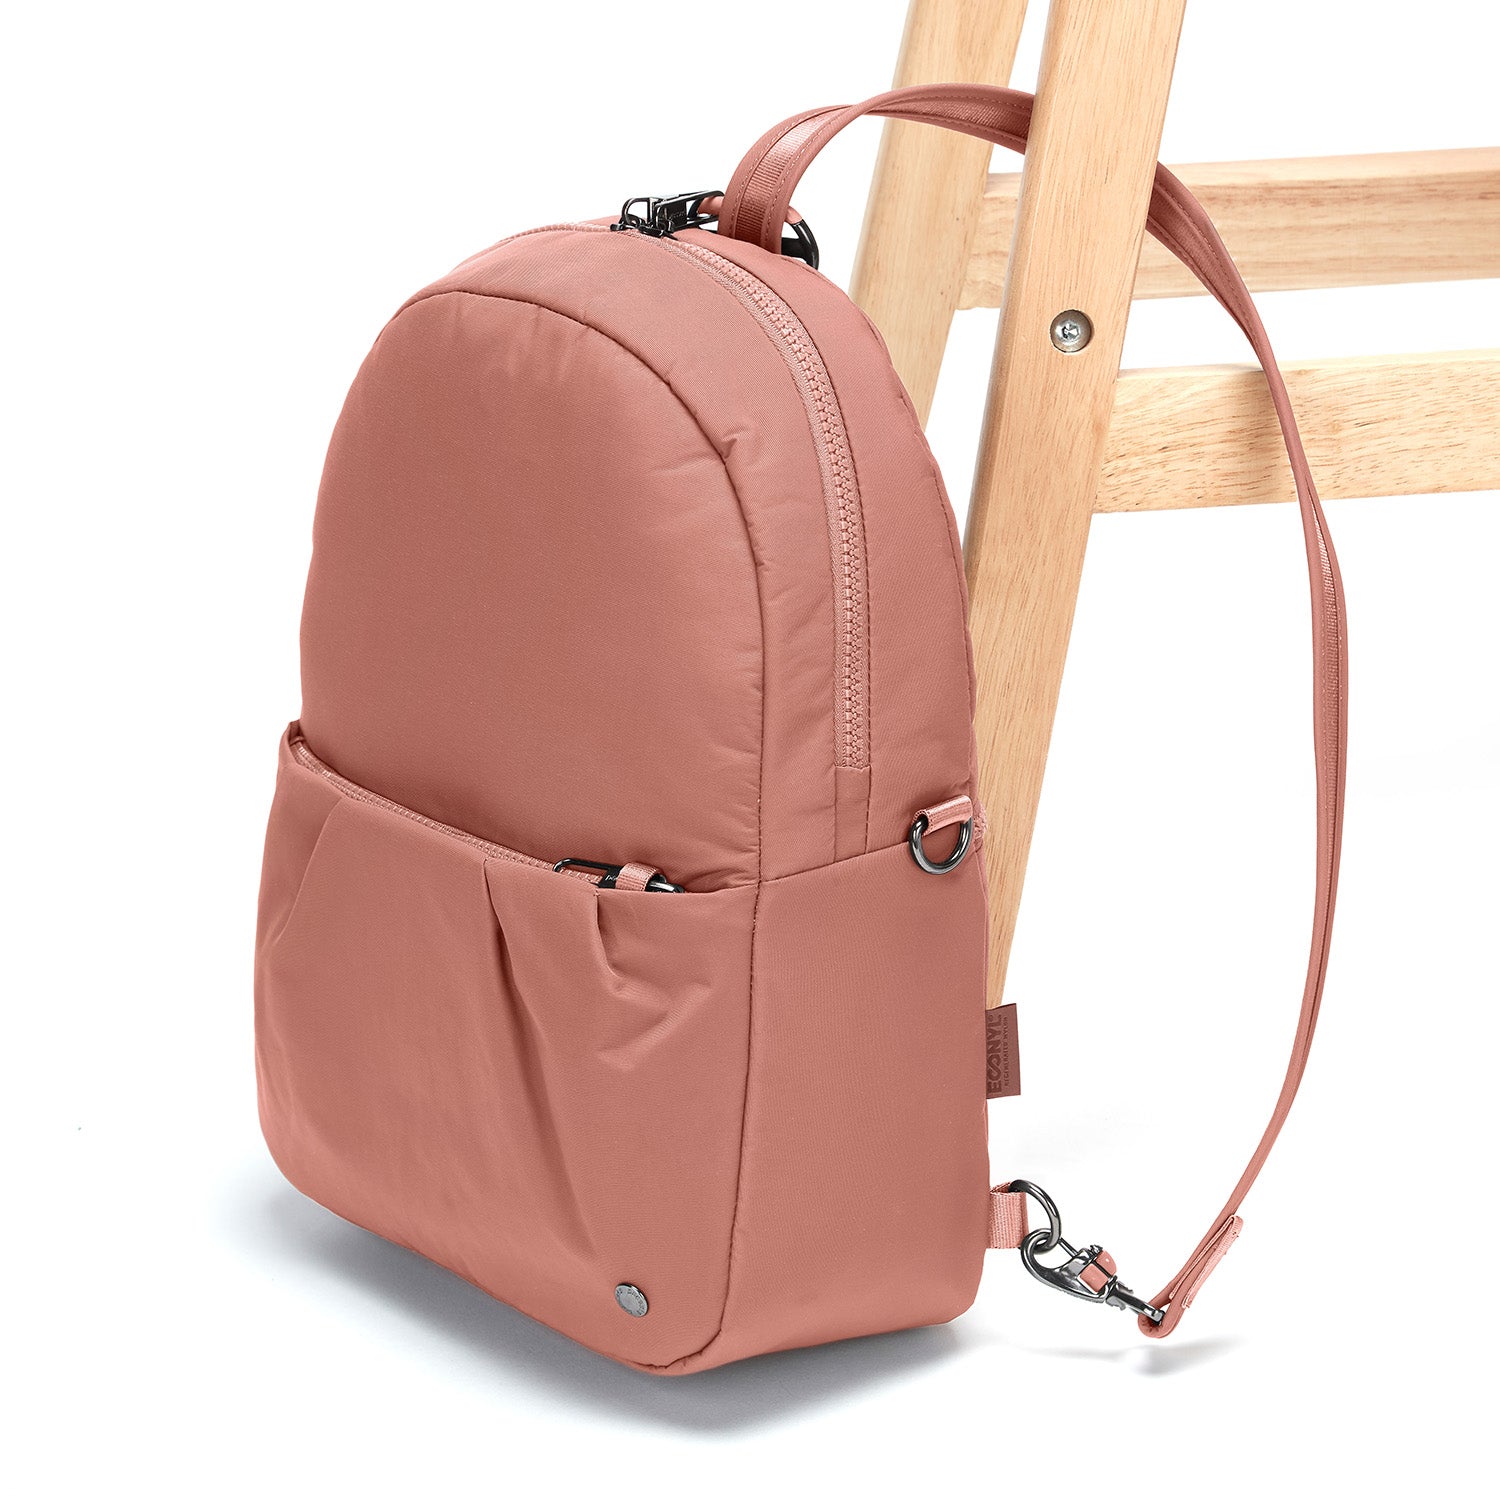 One strap turns this handbag into a tote, backpack and office purse! -  Yanko Design